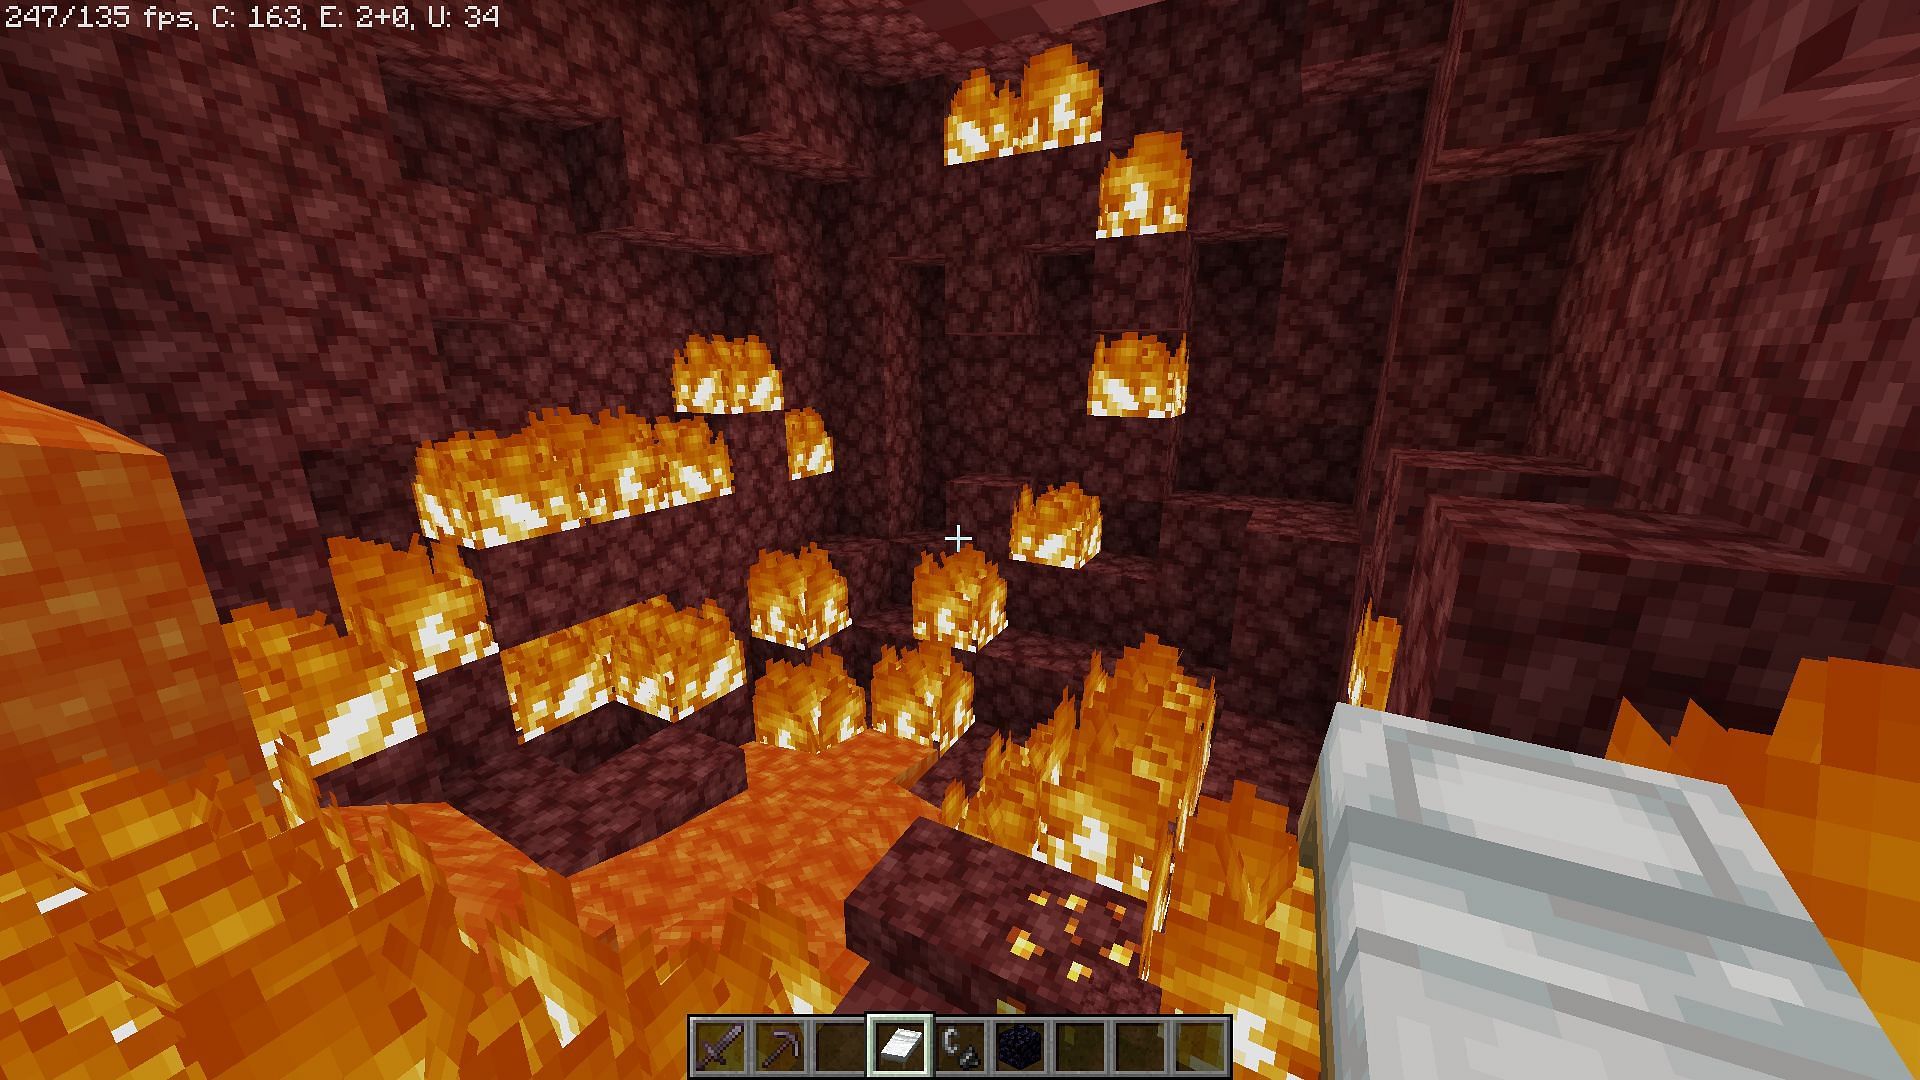 Explode areas of Nether to find Ancient Debris in Minecraft 1.20 (Image via Mojang)